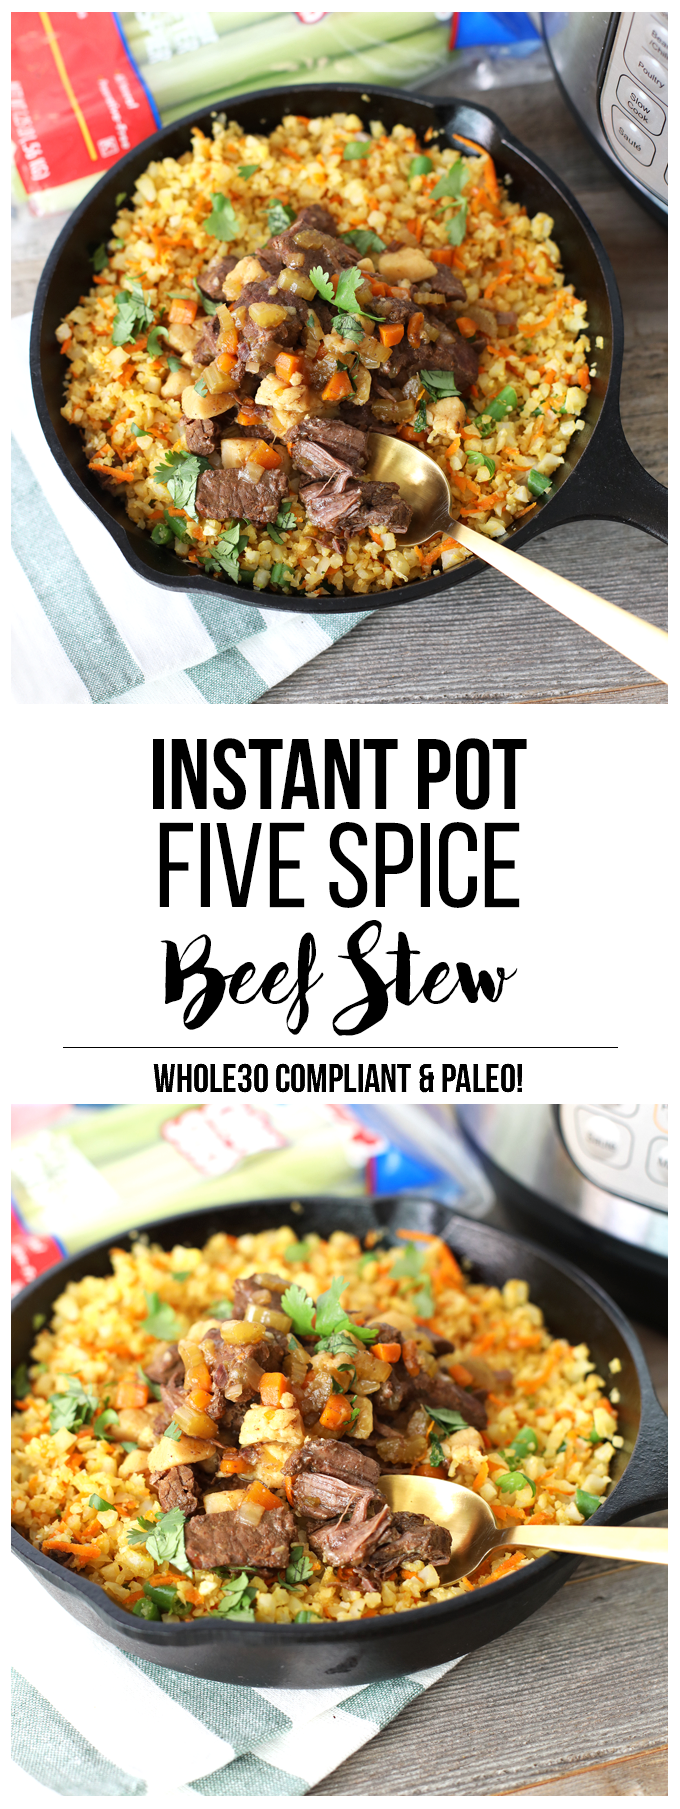 This Instant Pot Five Spice Beef Stew is the perfect way to mix up a comfort food classic! It is Whole30 and Paleo - perfect for the whole family!